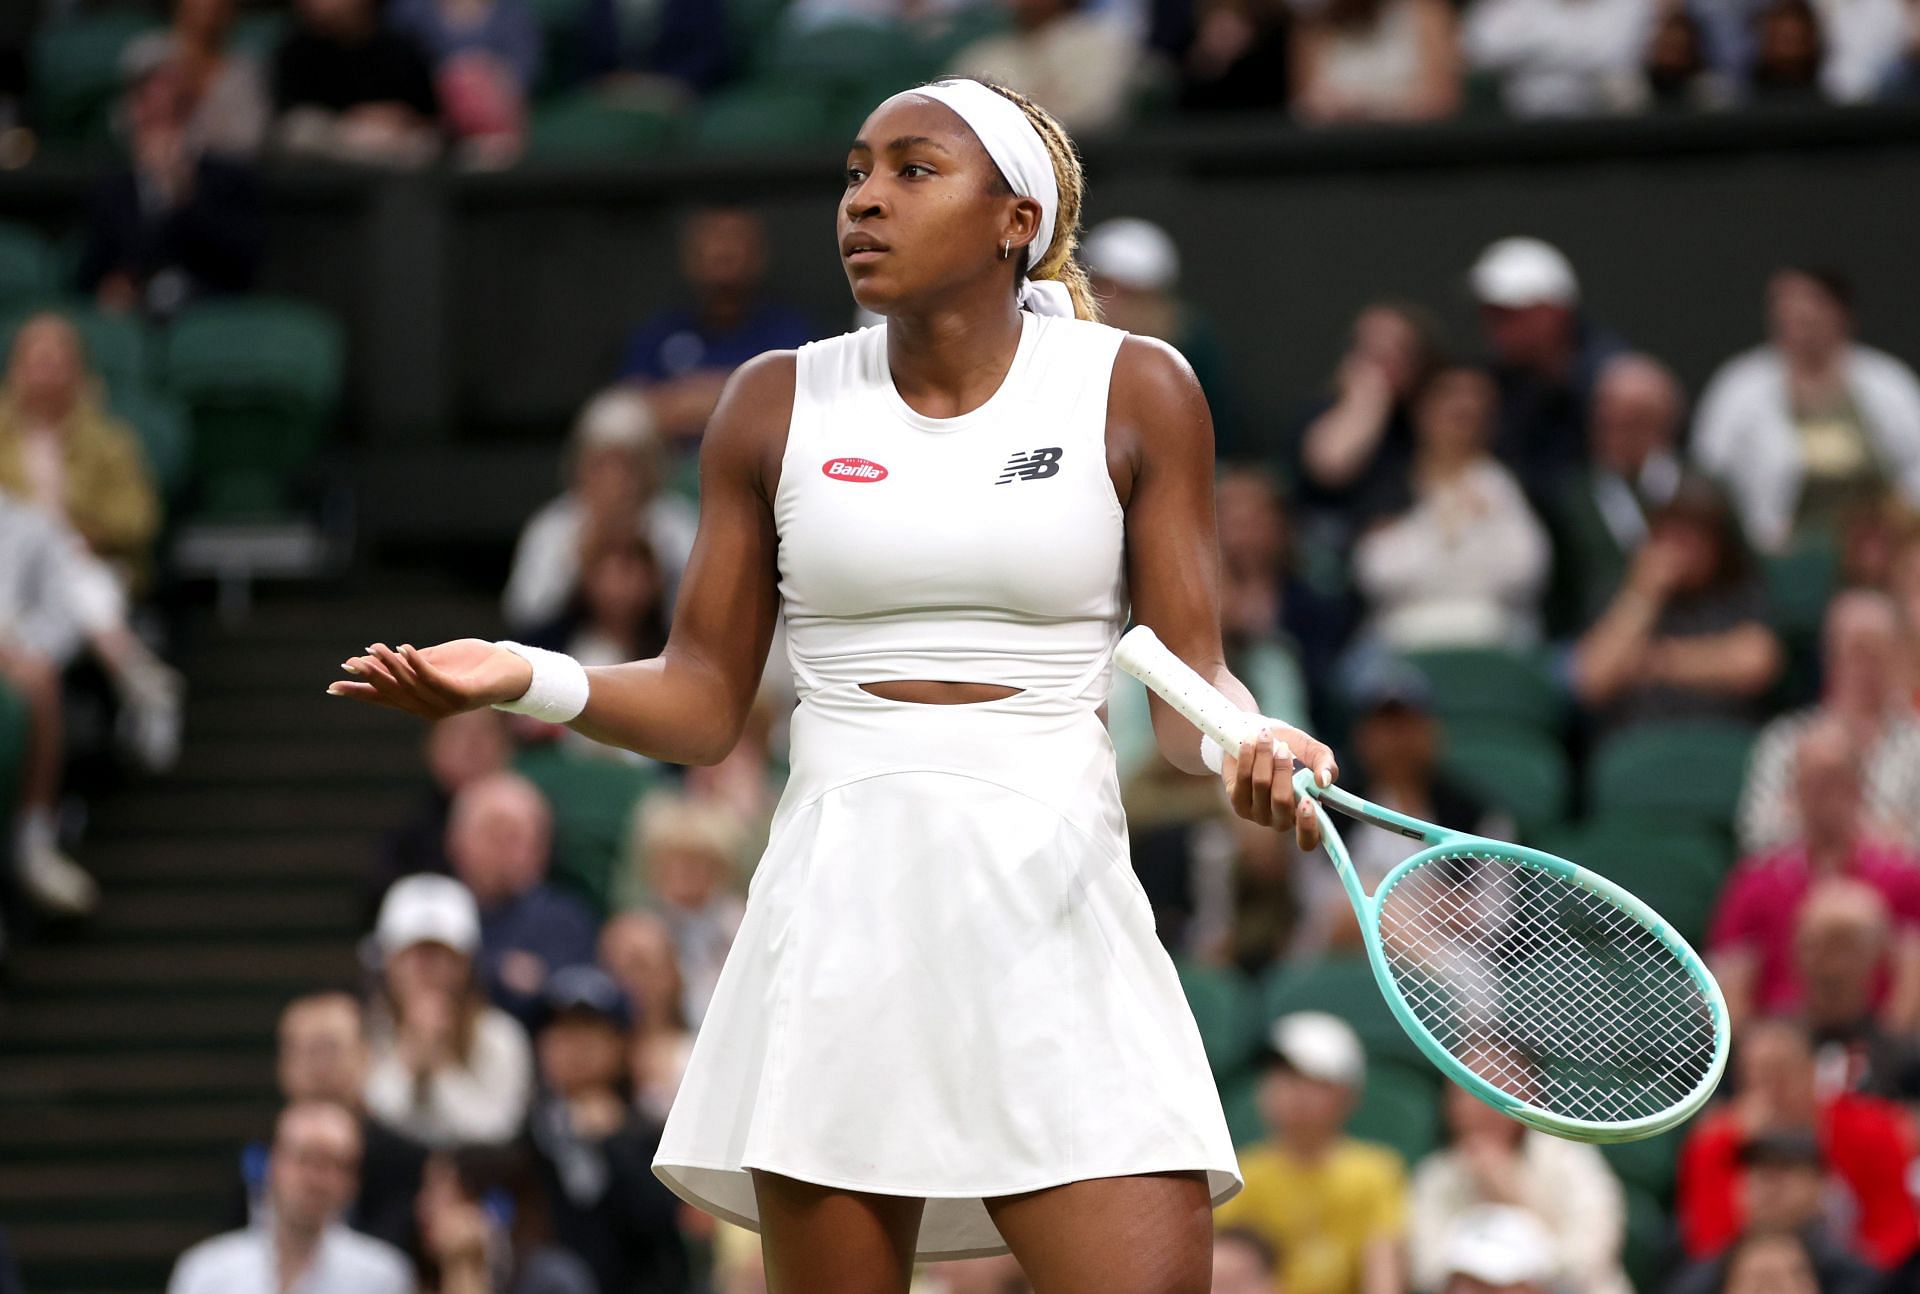 Should Coco Gauff get the same criticism as Iga Swiatek for failing to succeed at Wimbledon?